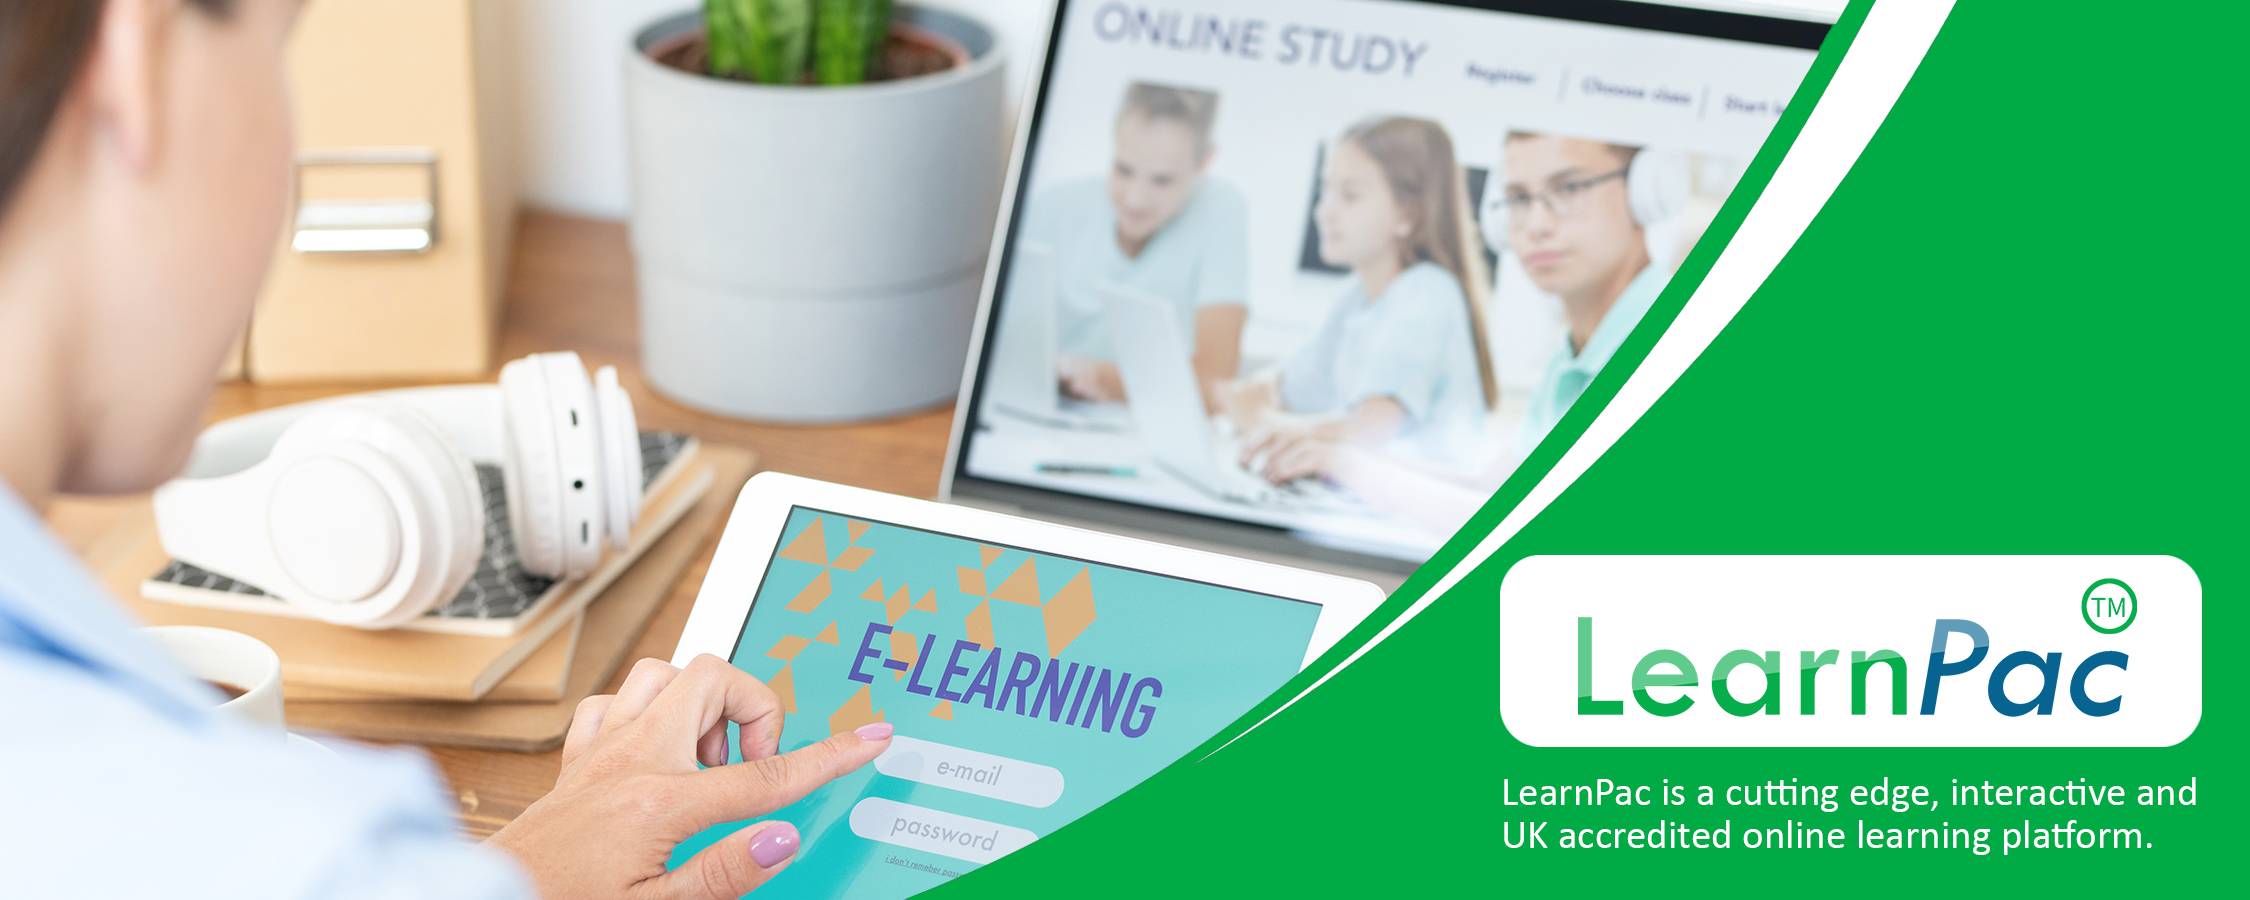 Building a Productive Team - eLearning Course - CPD Certified - LearnPac Systems UK -